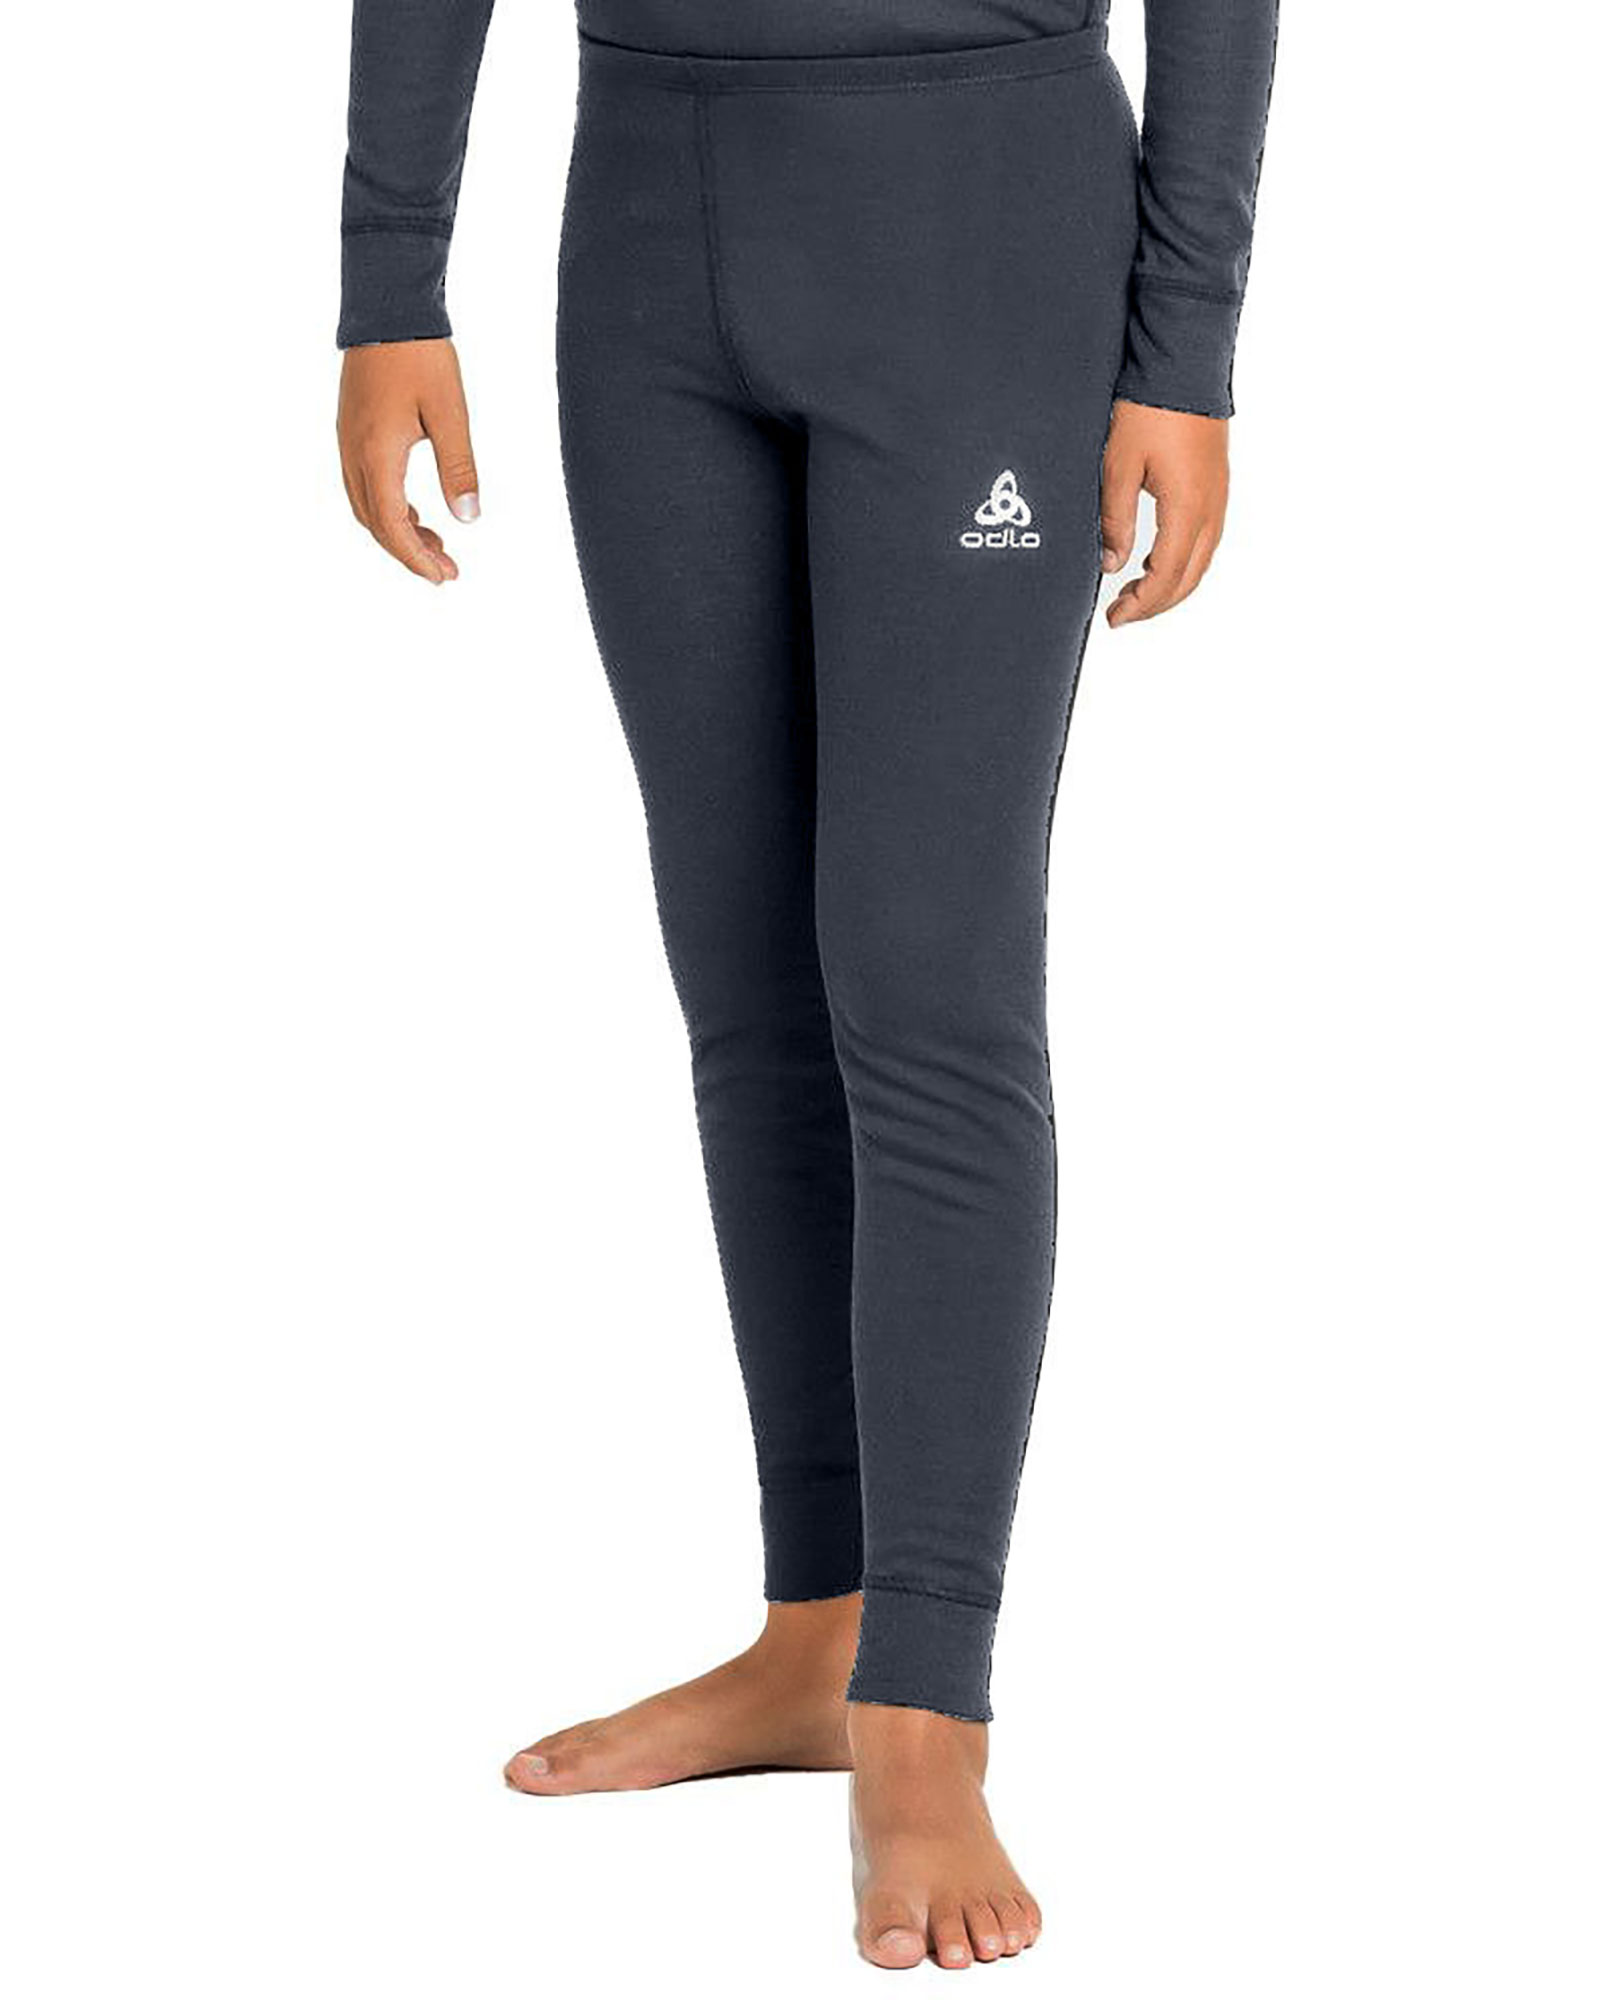 Odlo Active Warm Eco BL Kids’ Bottoms Long - India Ink 8 Years